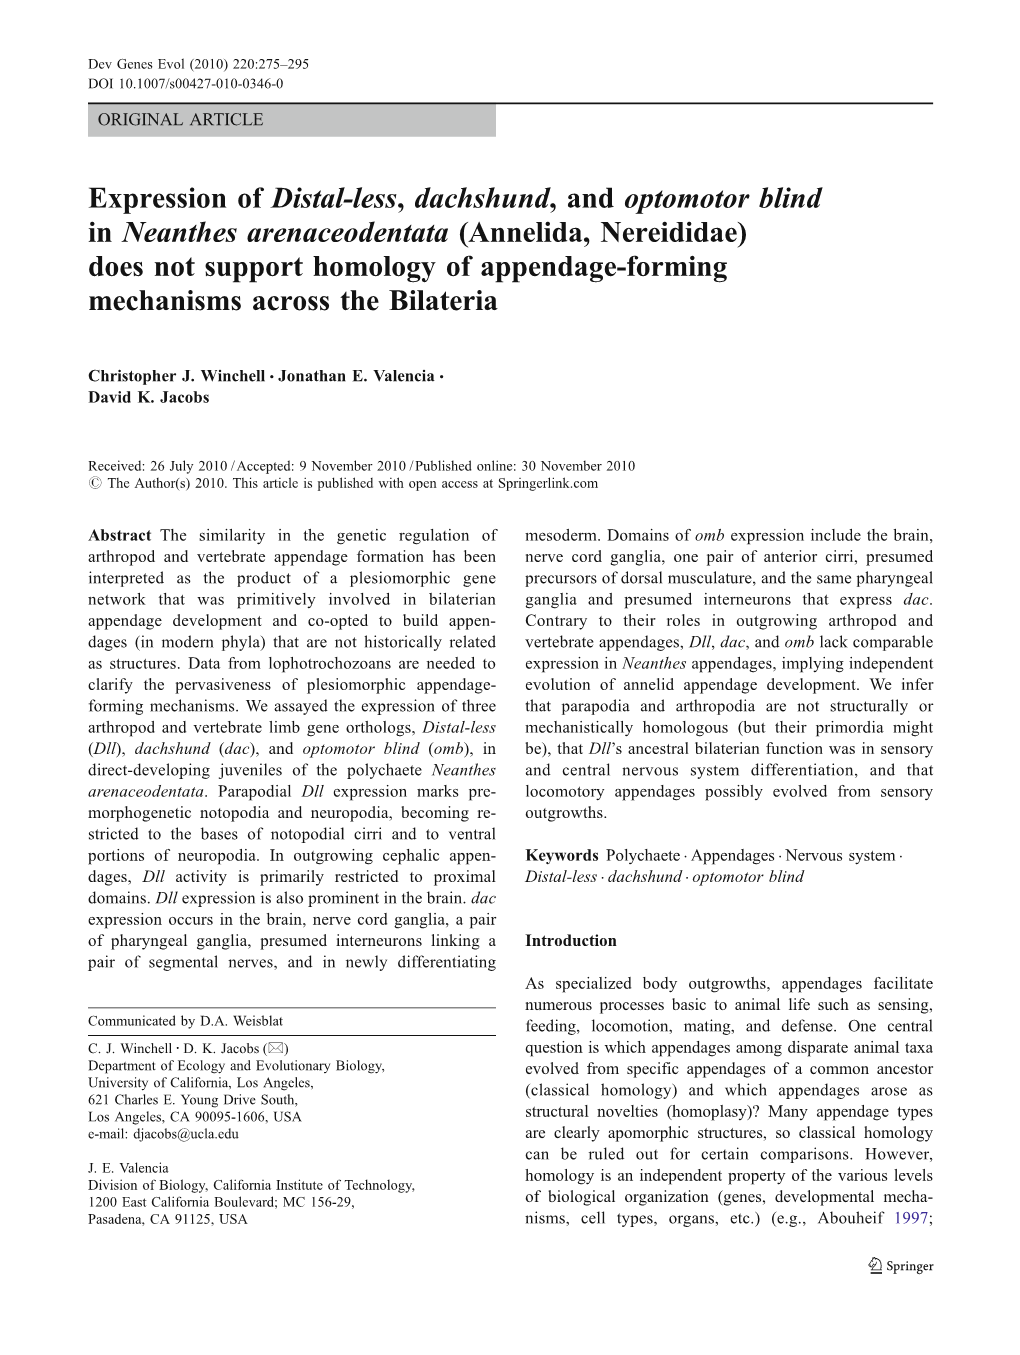 Expression of Distal-Less, Dachshund, and Optomotor Blind in Neanthes Arenaceodentata